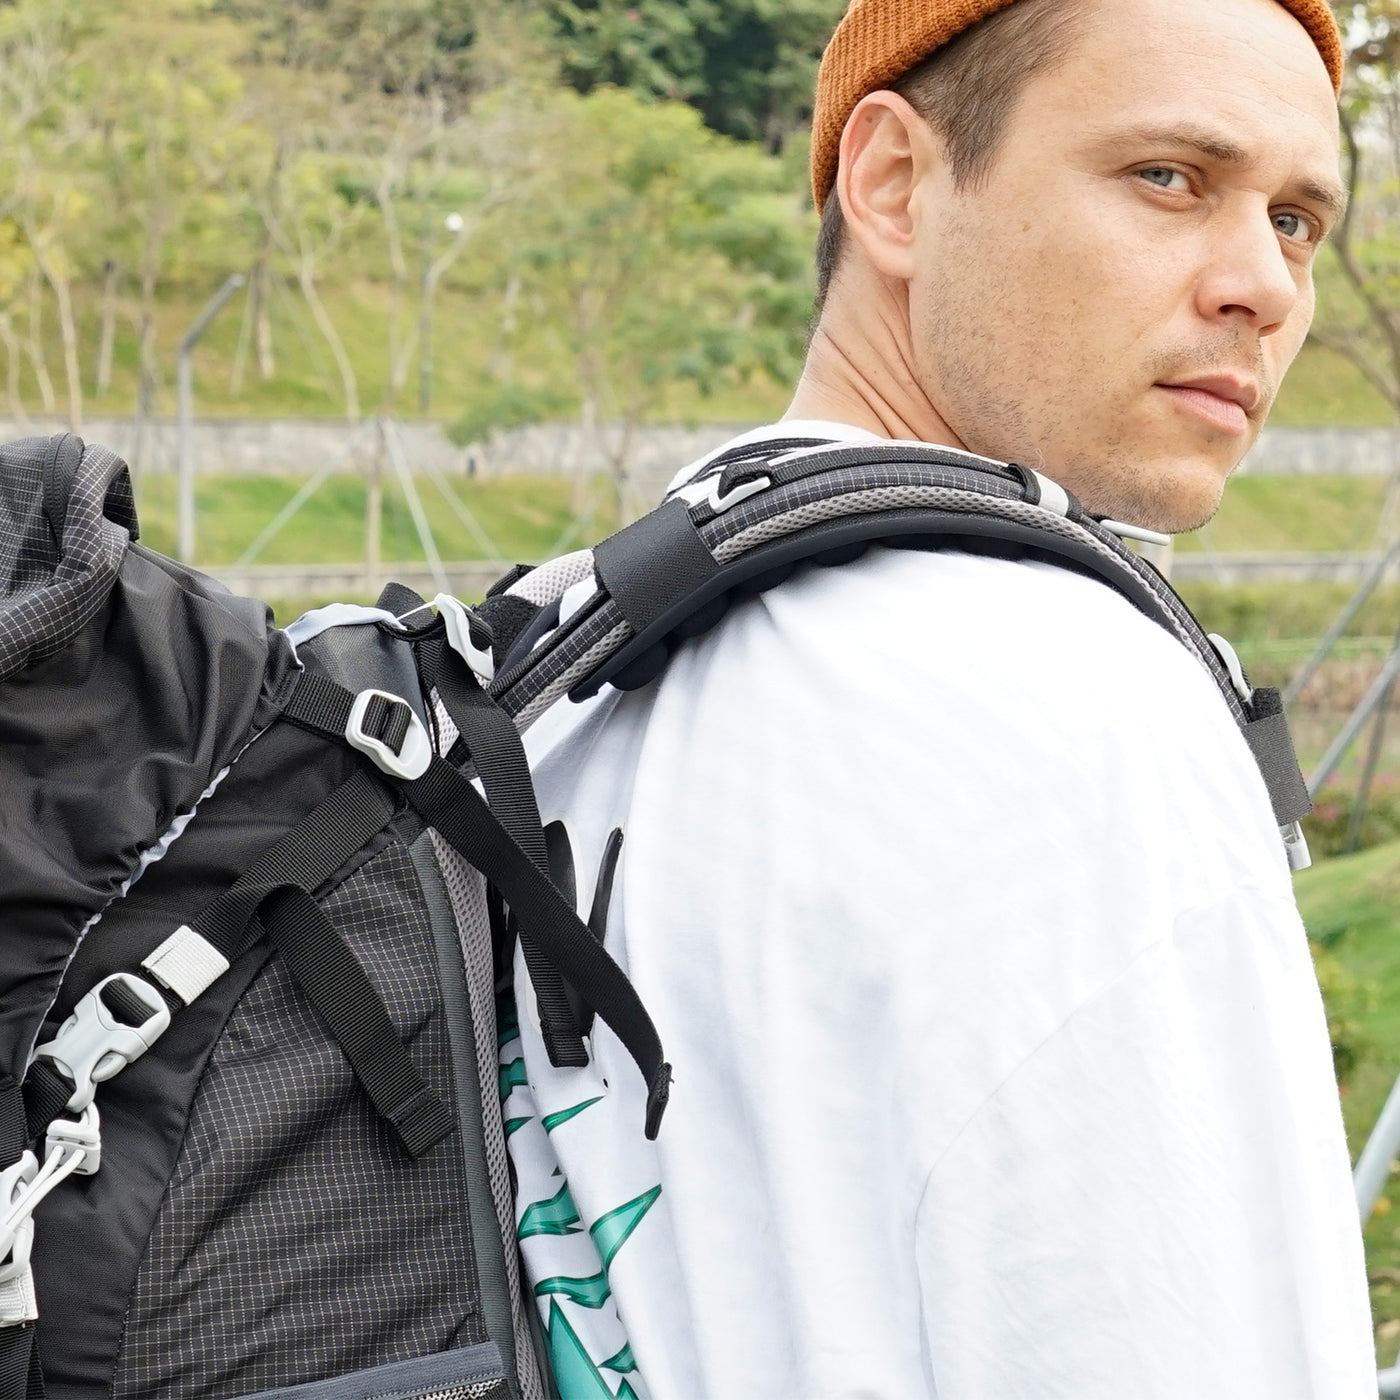 AirStrap: Your Instant Weight-Reducing Bag Shoulder Straps by